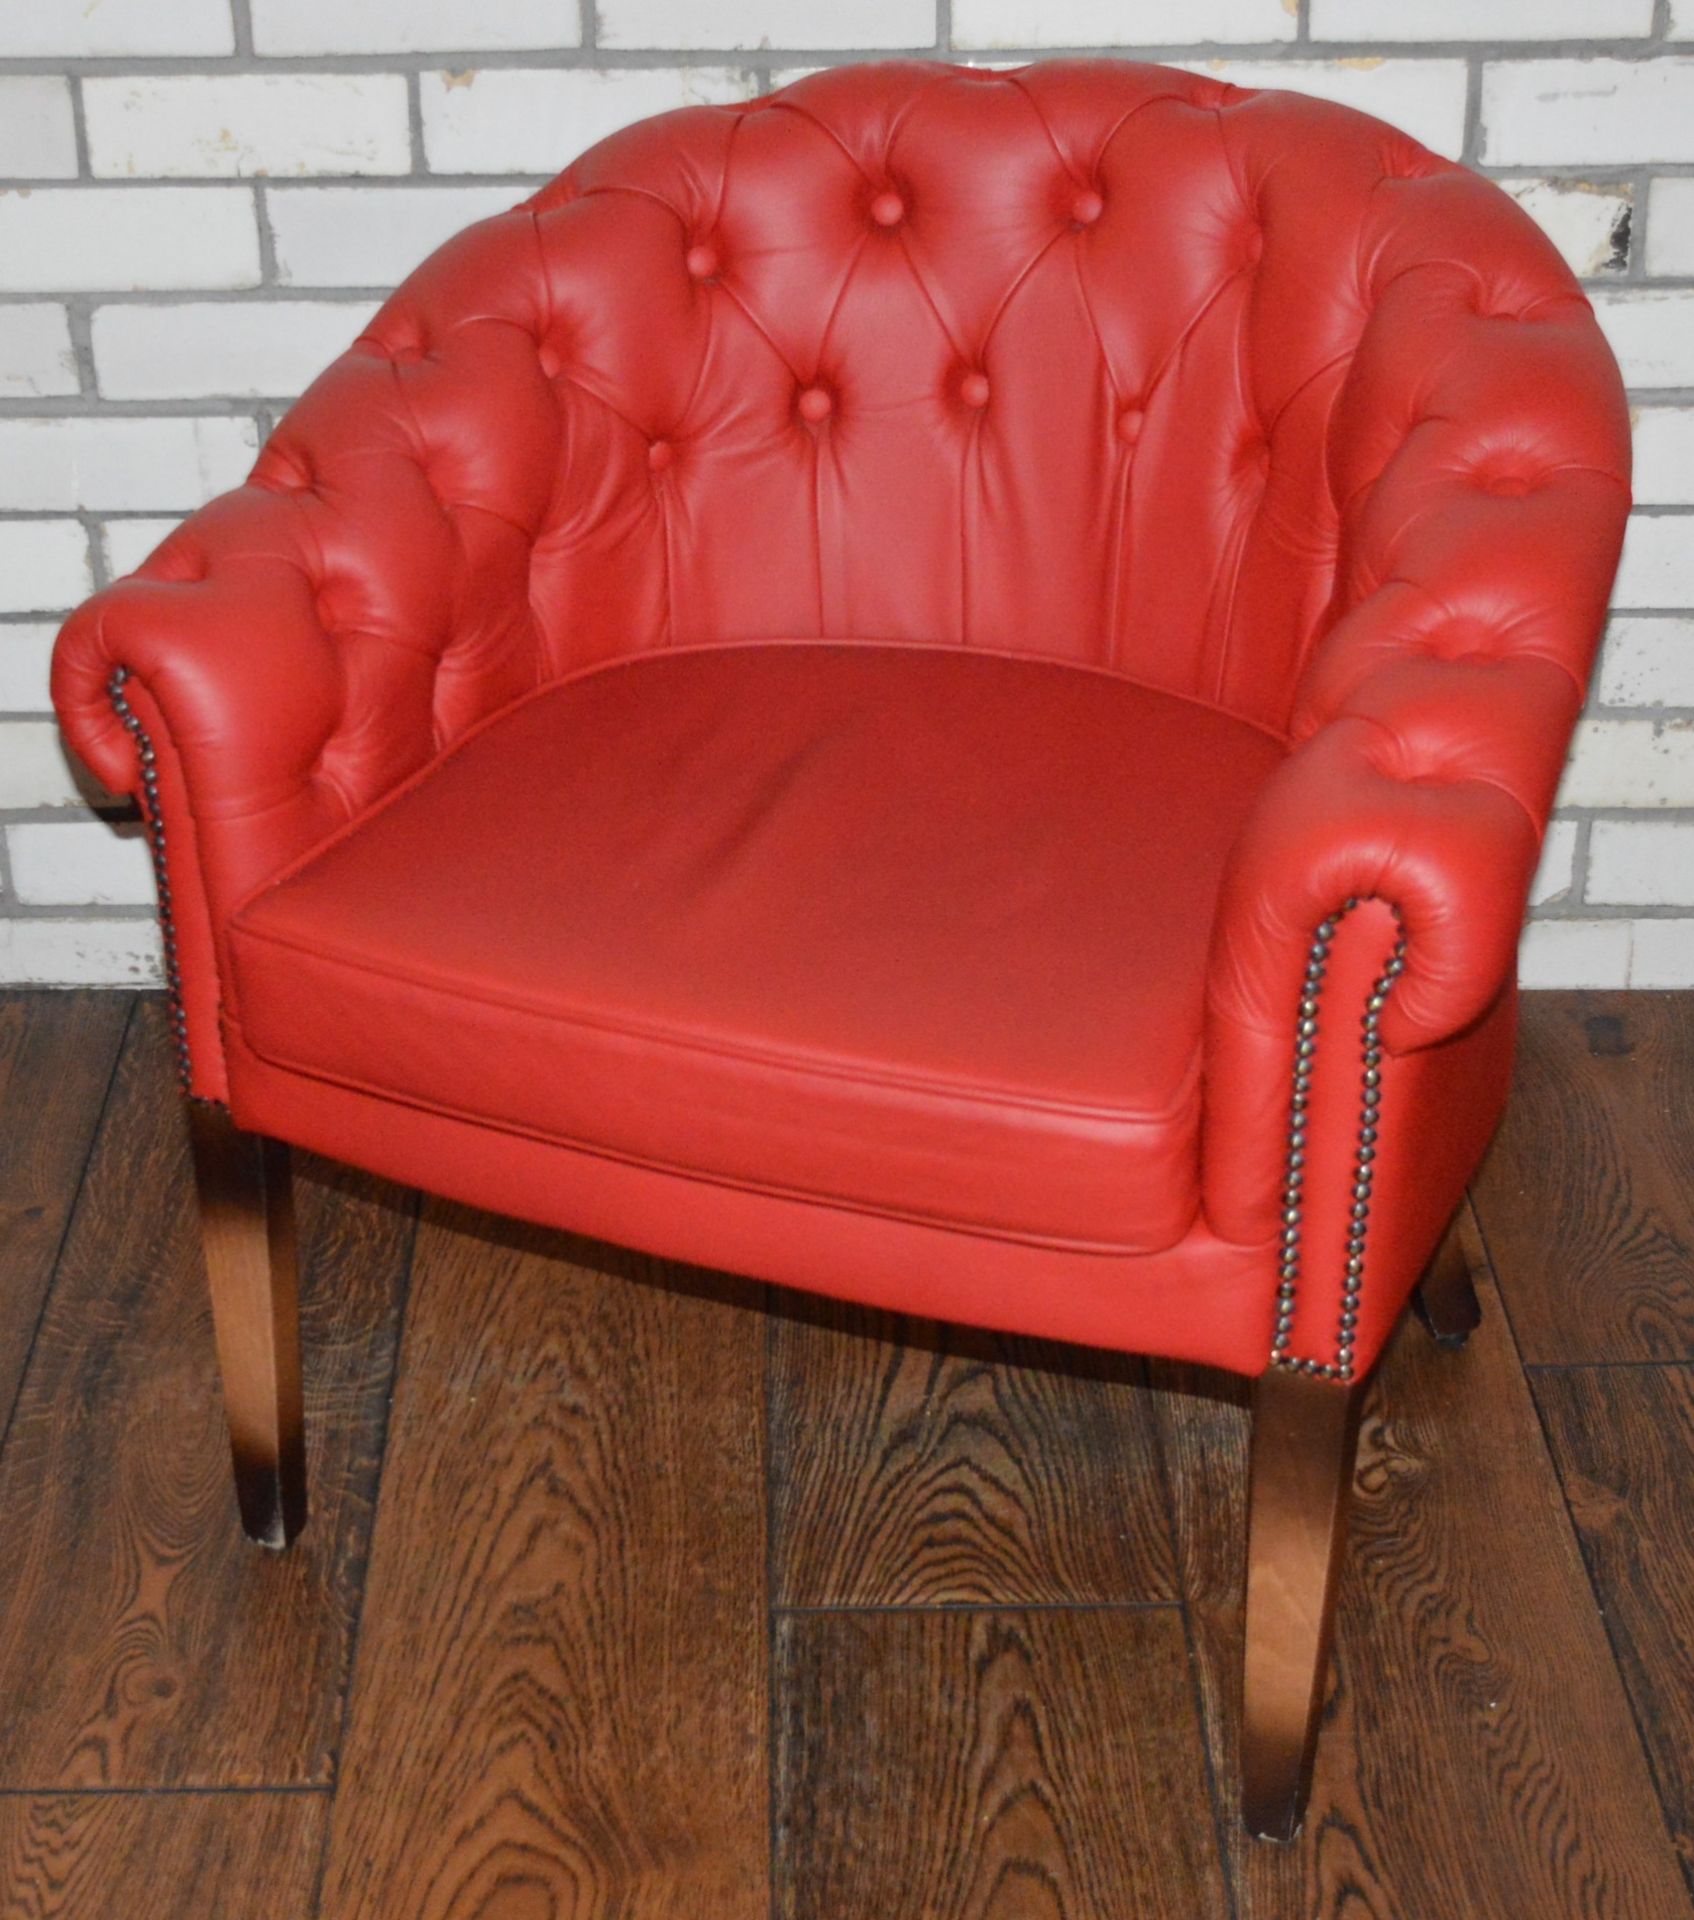 2 x Chesterfield Style Buttoned Back Red Leather Tub Chairs With Hardwood Legs Finished in an - Image 2 of 8